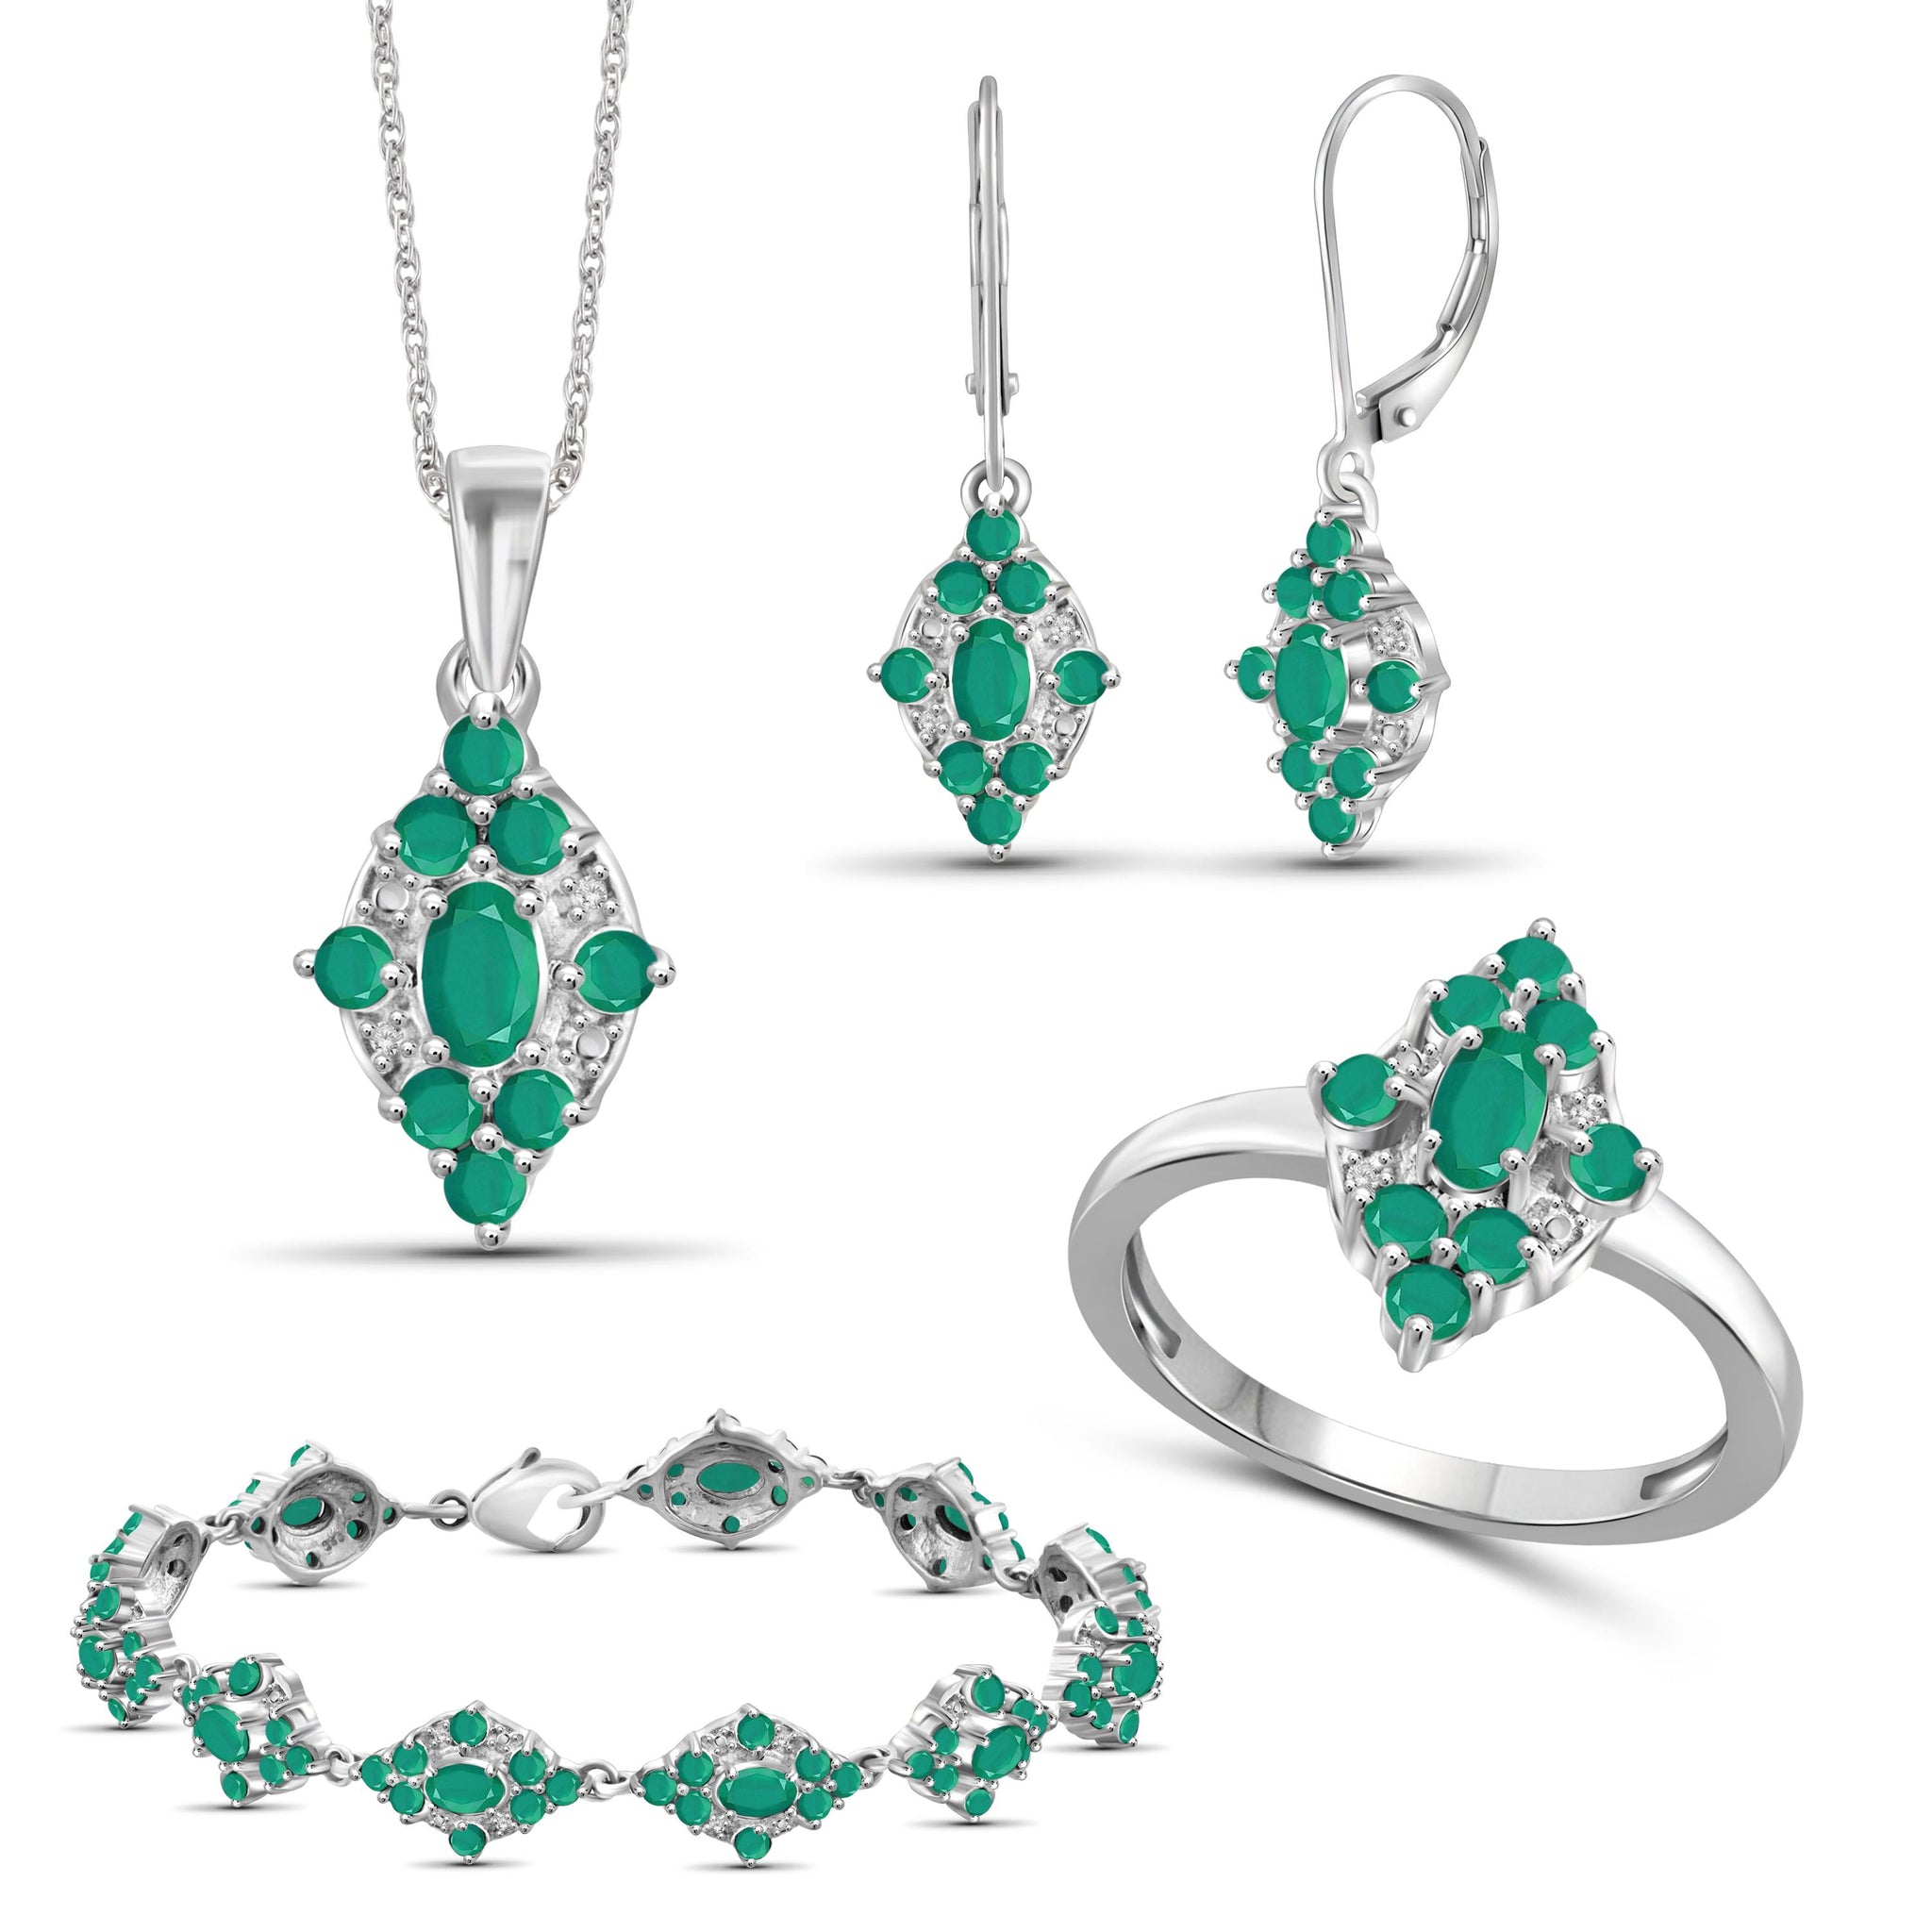 JewelonFire 10.60 Carat T.G.W. Emerald And 1/20 Carat T.W. White Diamond Sterling Silver 4 Piece Jewelry Set - Assorted Colors